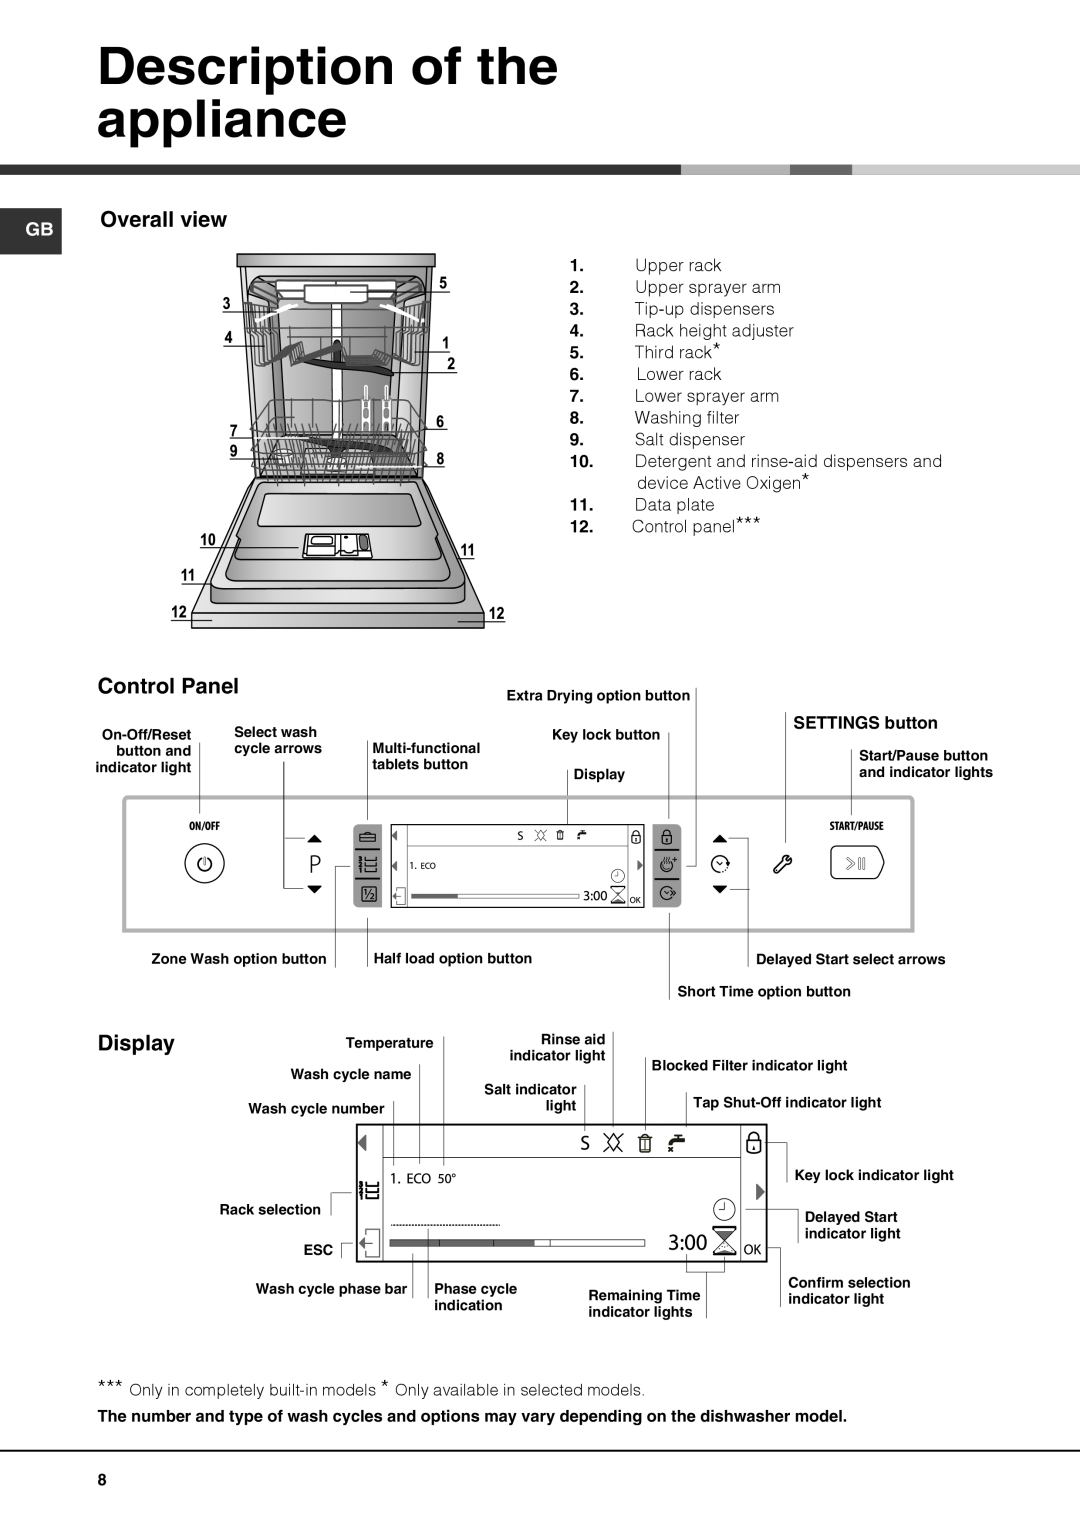 Hotpoint 51110 manual Description of the appliance, Overall view, Control Panel, Display, SETTINGS button 